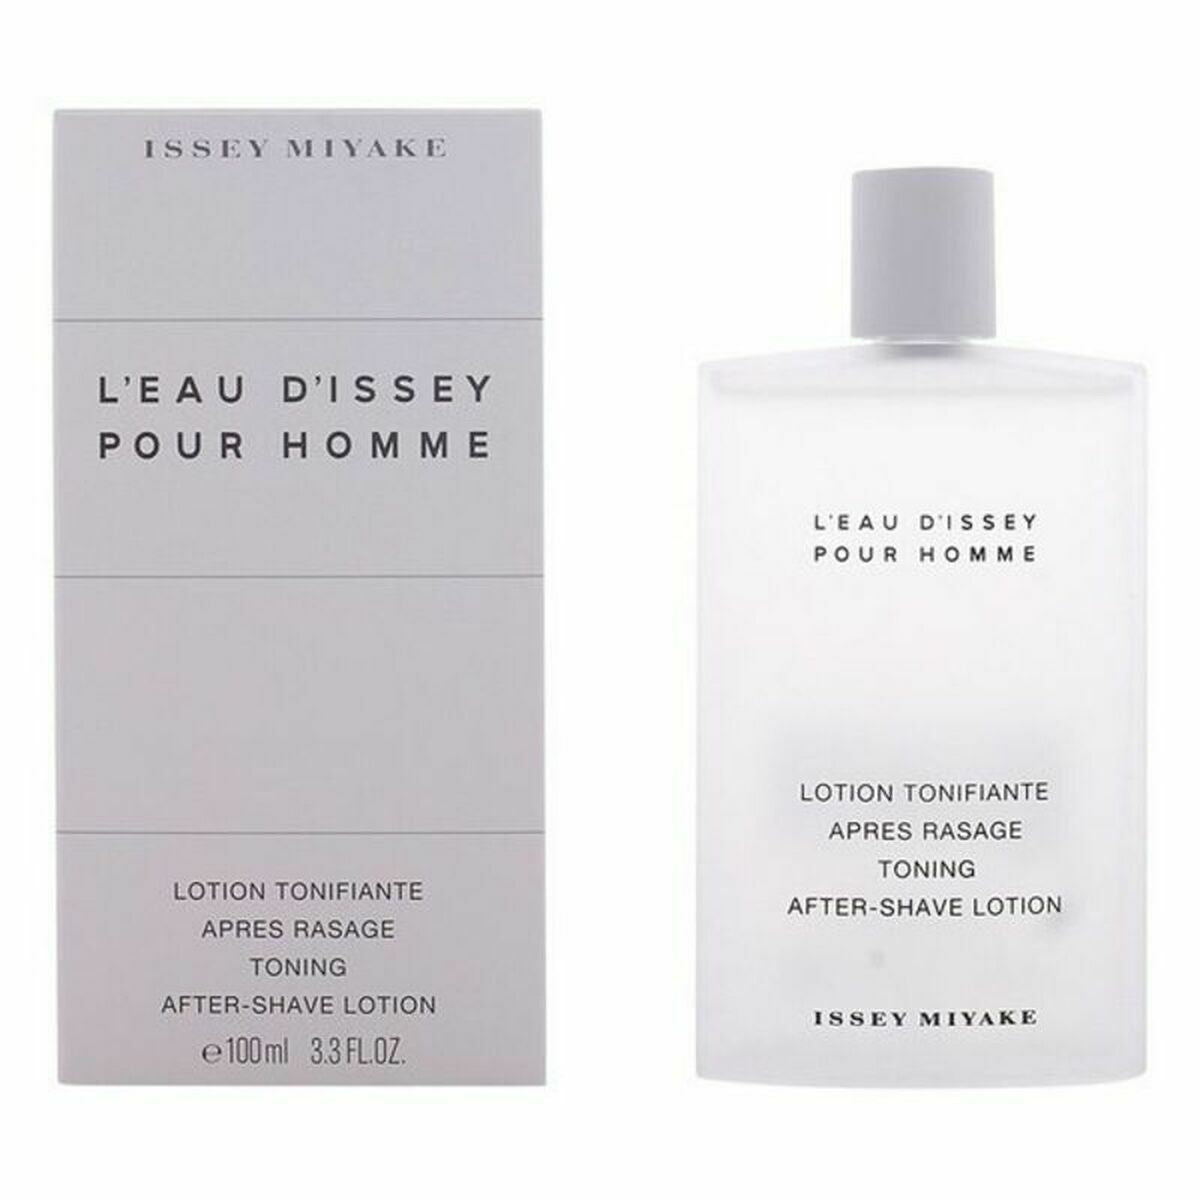 After Shave-Lotion Issey Miyake (100 ml) L'eau D'issey Pour Homme (100 ml)